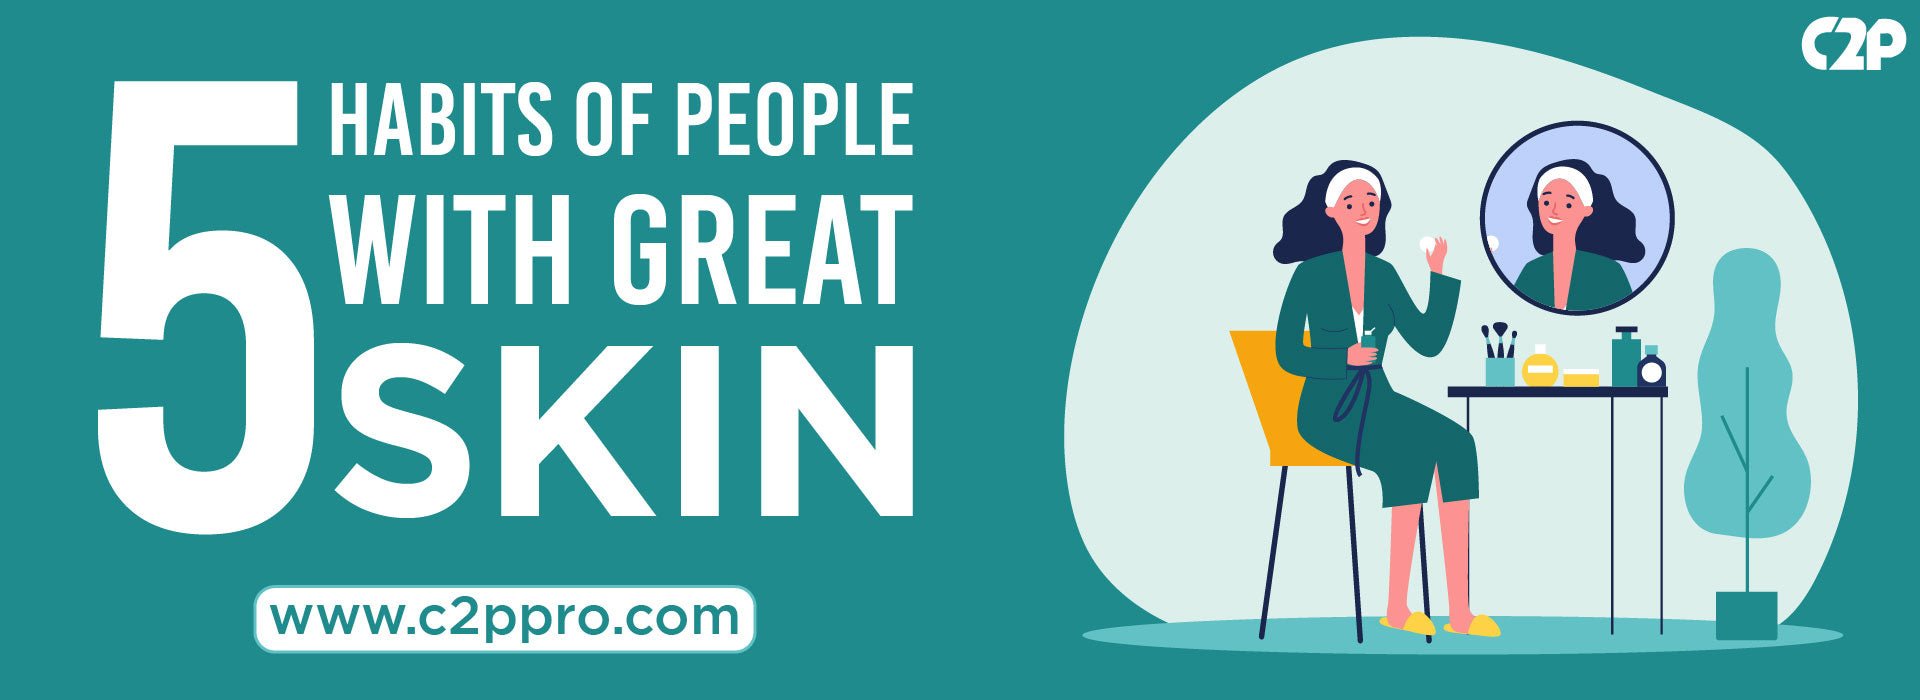 5 Habits Of People With Great Skin - C2P Pro